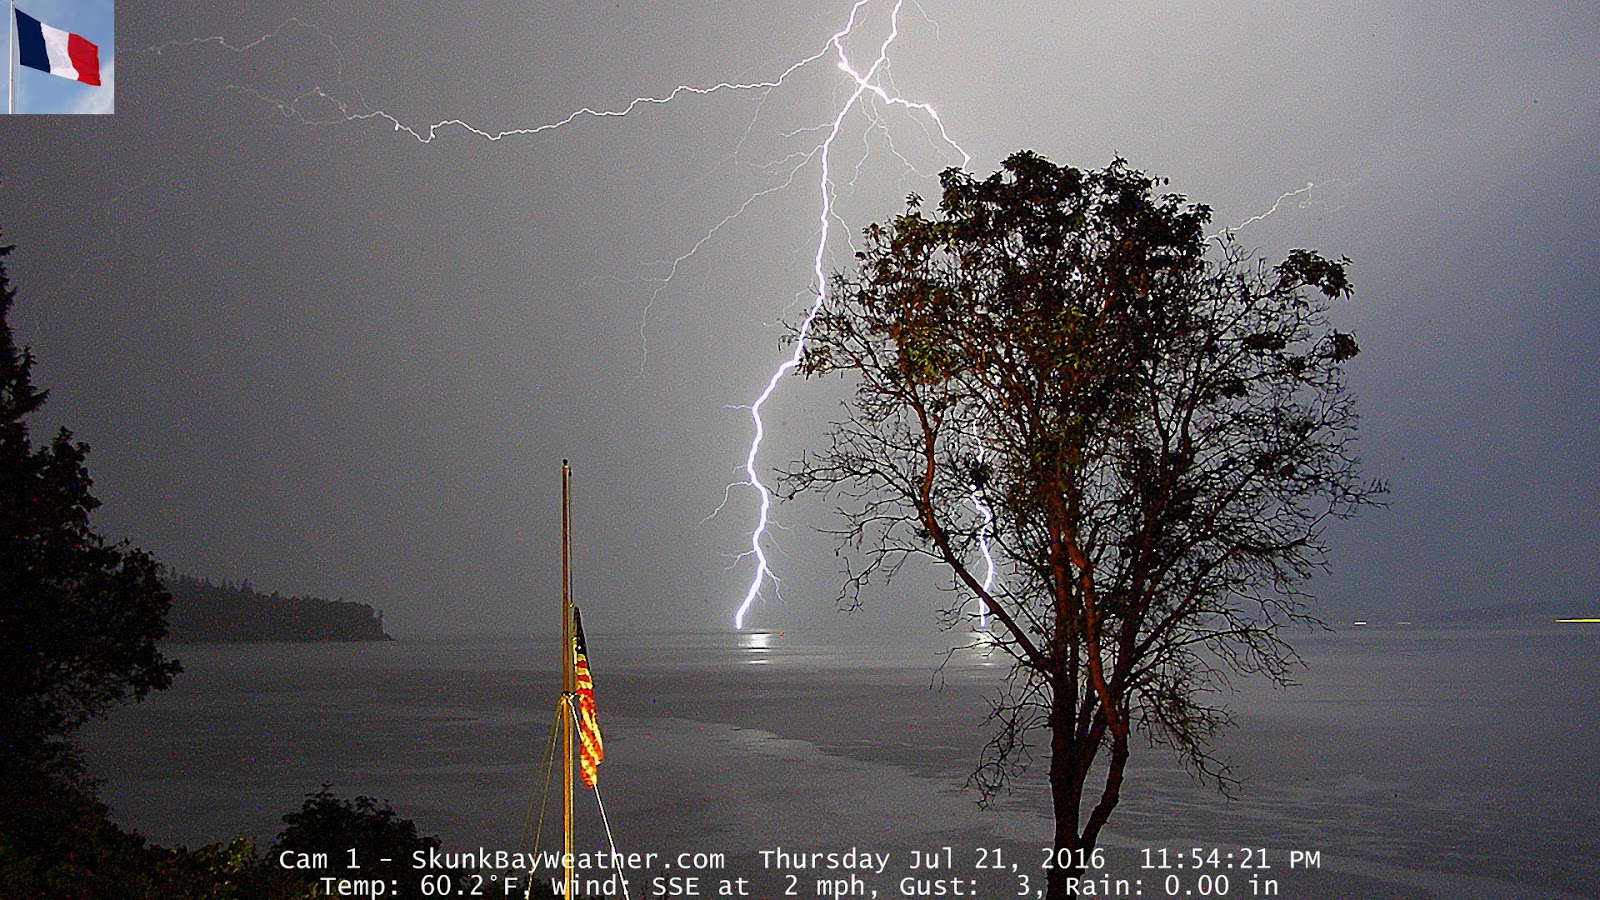 Mass Weather Blog: Weather Cam Provides a VERY Close Up View of Lightning Strike